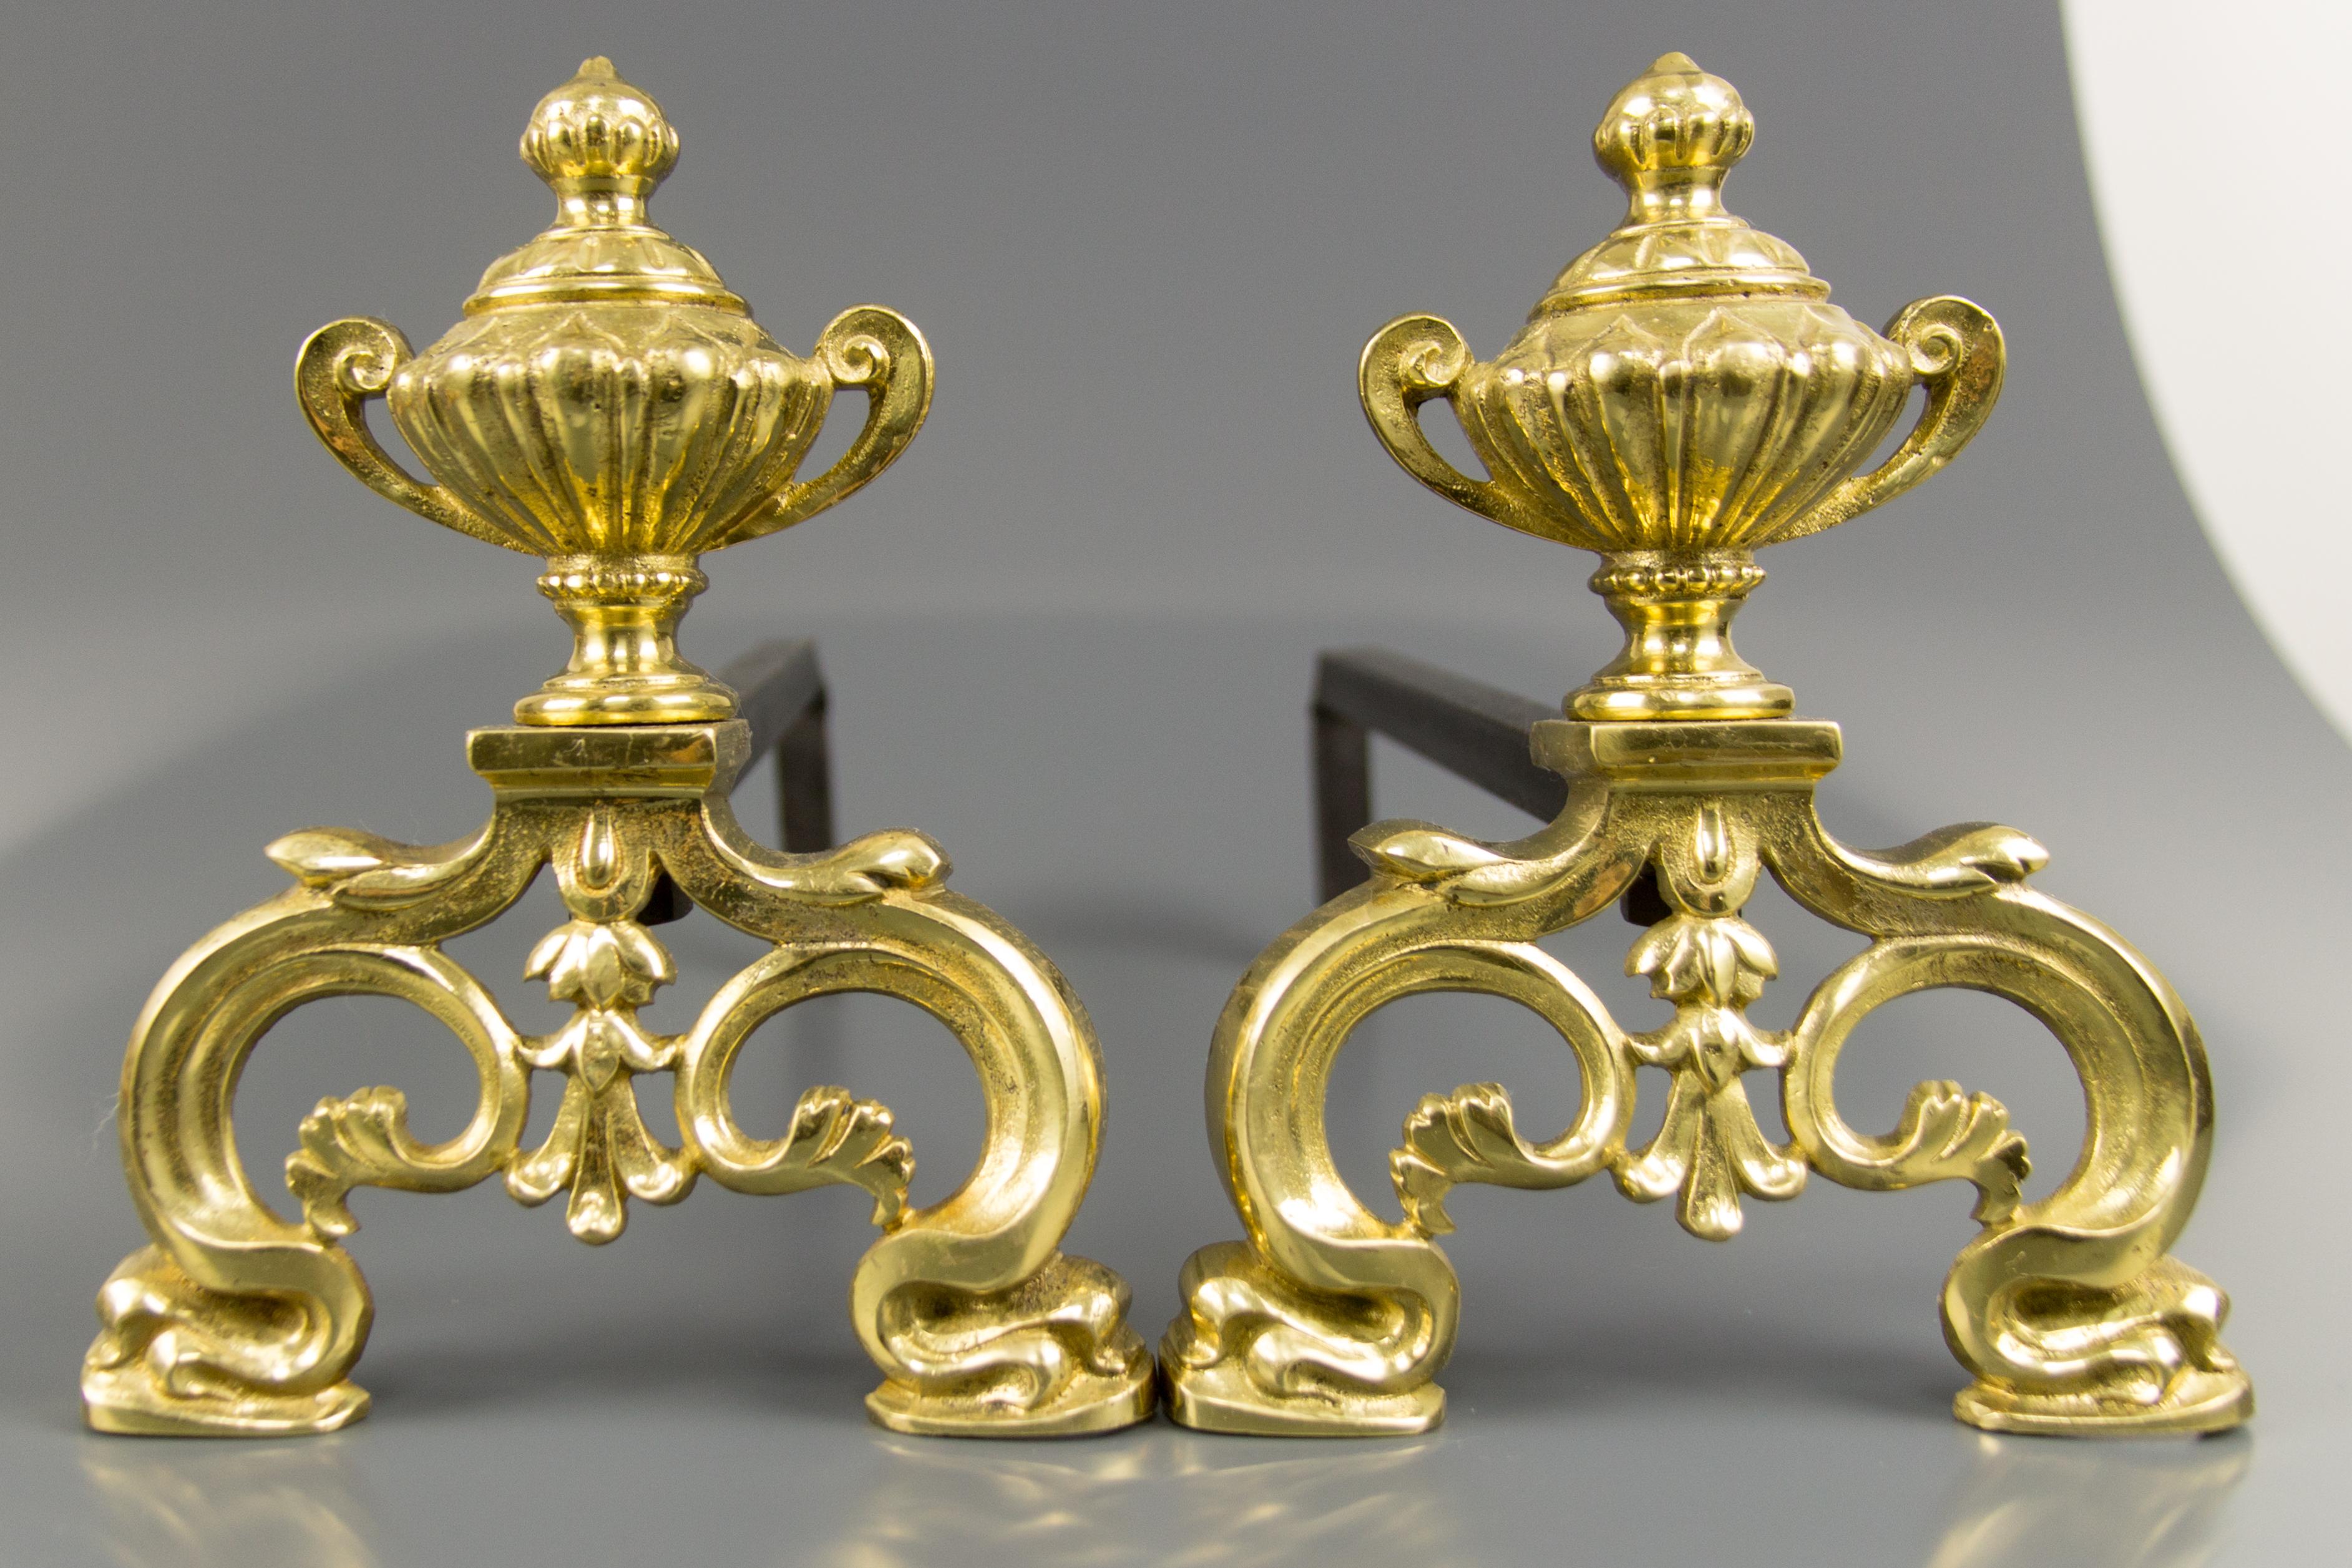 This beautiful and elegant pair of Dutch Baroque style gilt bronze and cast iron andirons is decorated with scrolled feet, acanthus leaf design, and urn-form finials.
Dimensions: height 21 cm / 8.26 in, width 16 cm / 6.29 in, depth 32 cm / 12.59 in.